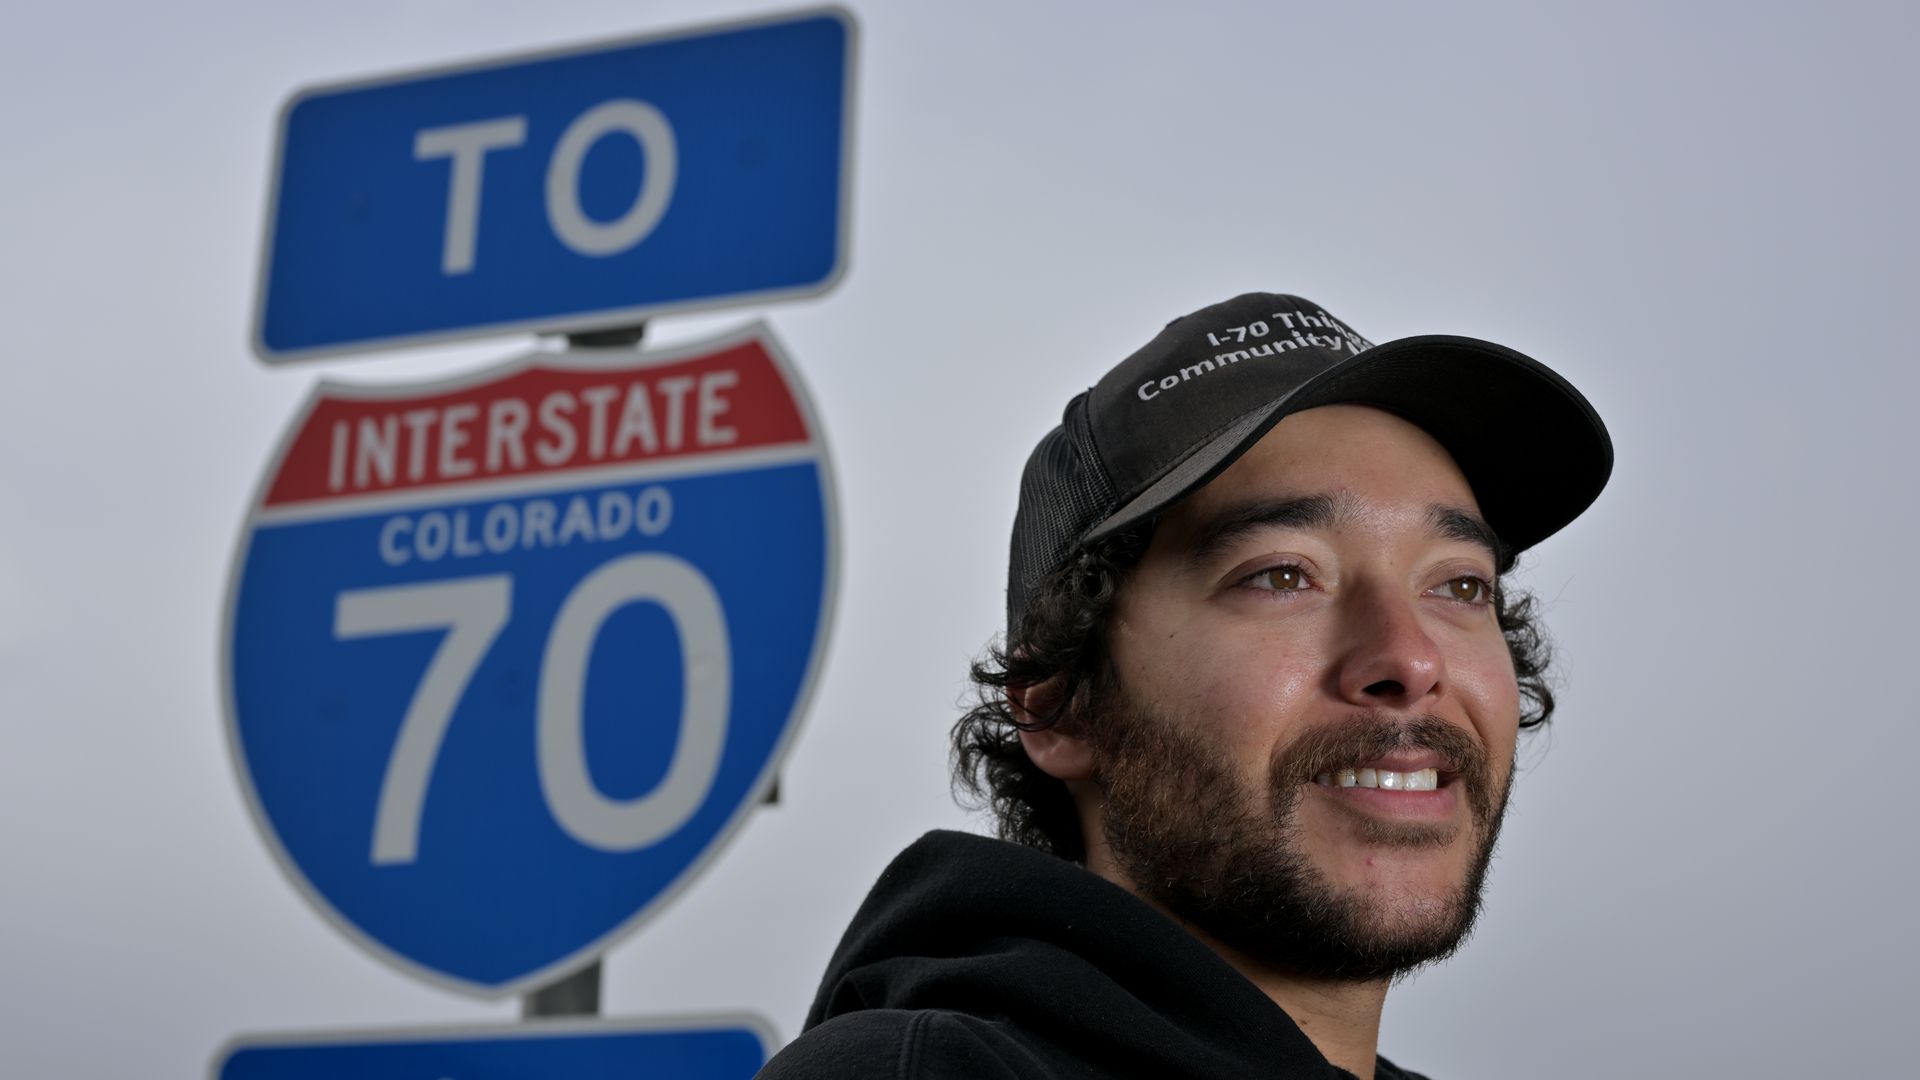 Alejandro Brown, creator and founder of @I-70Things. Photo: Hyoung Chang/The Denver Post